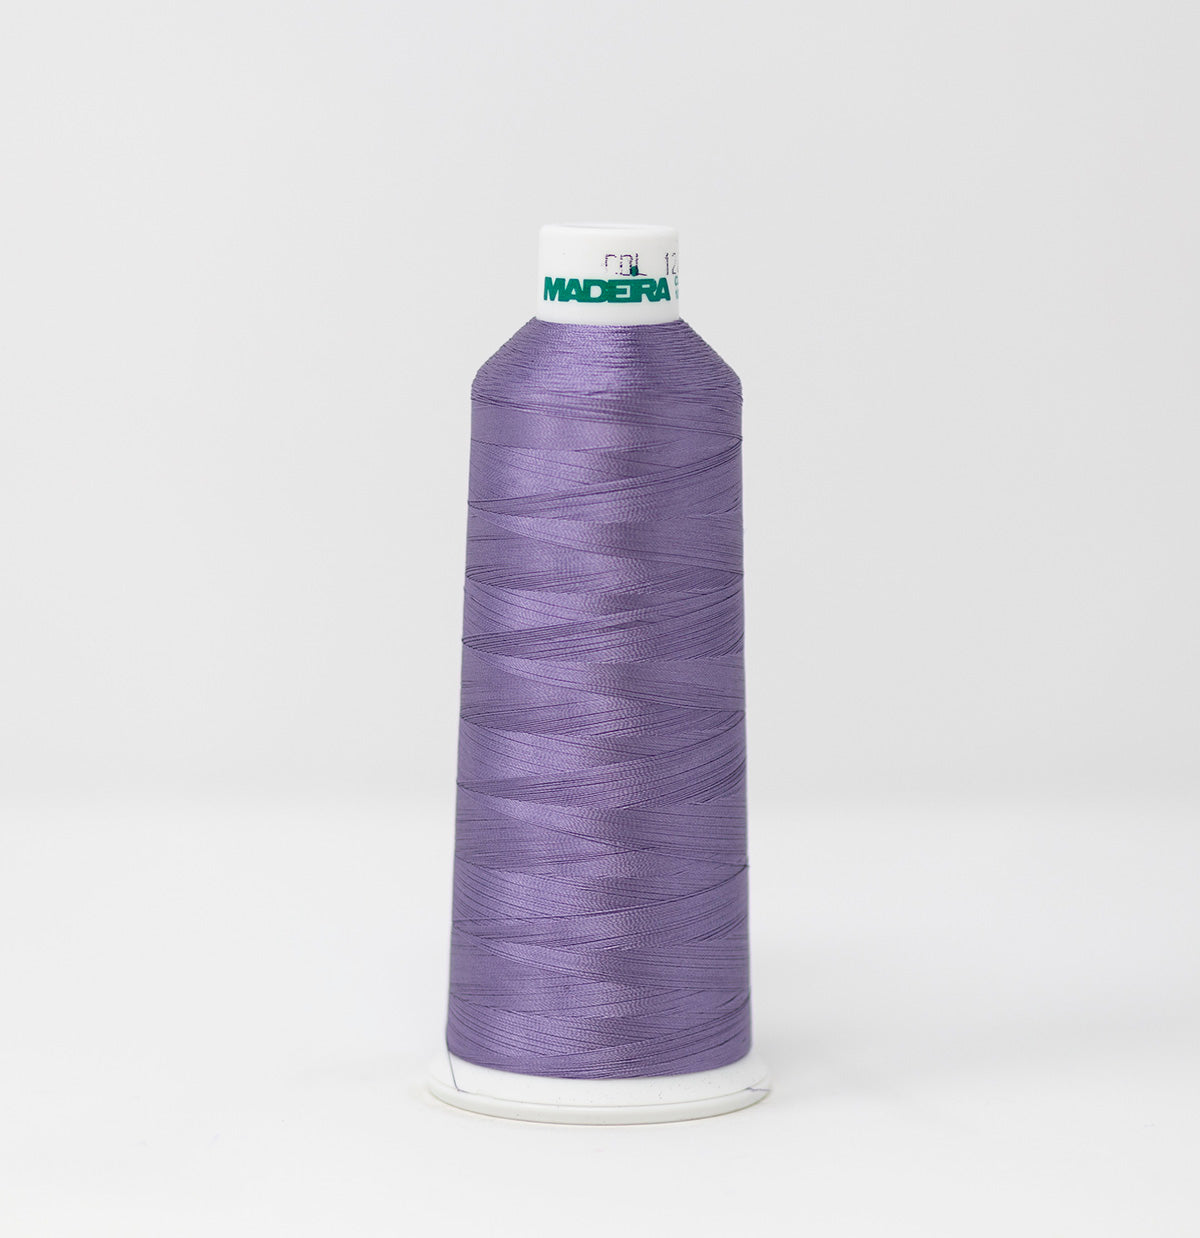 #910-1263 5,500 yard cone of #40 weight Dusty Lilac Purple Rayon machine embroidery thread.